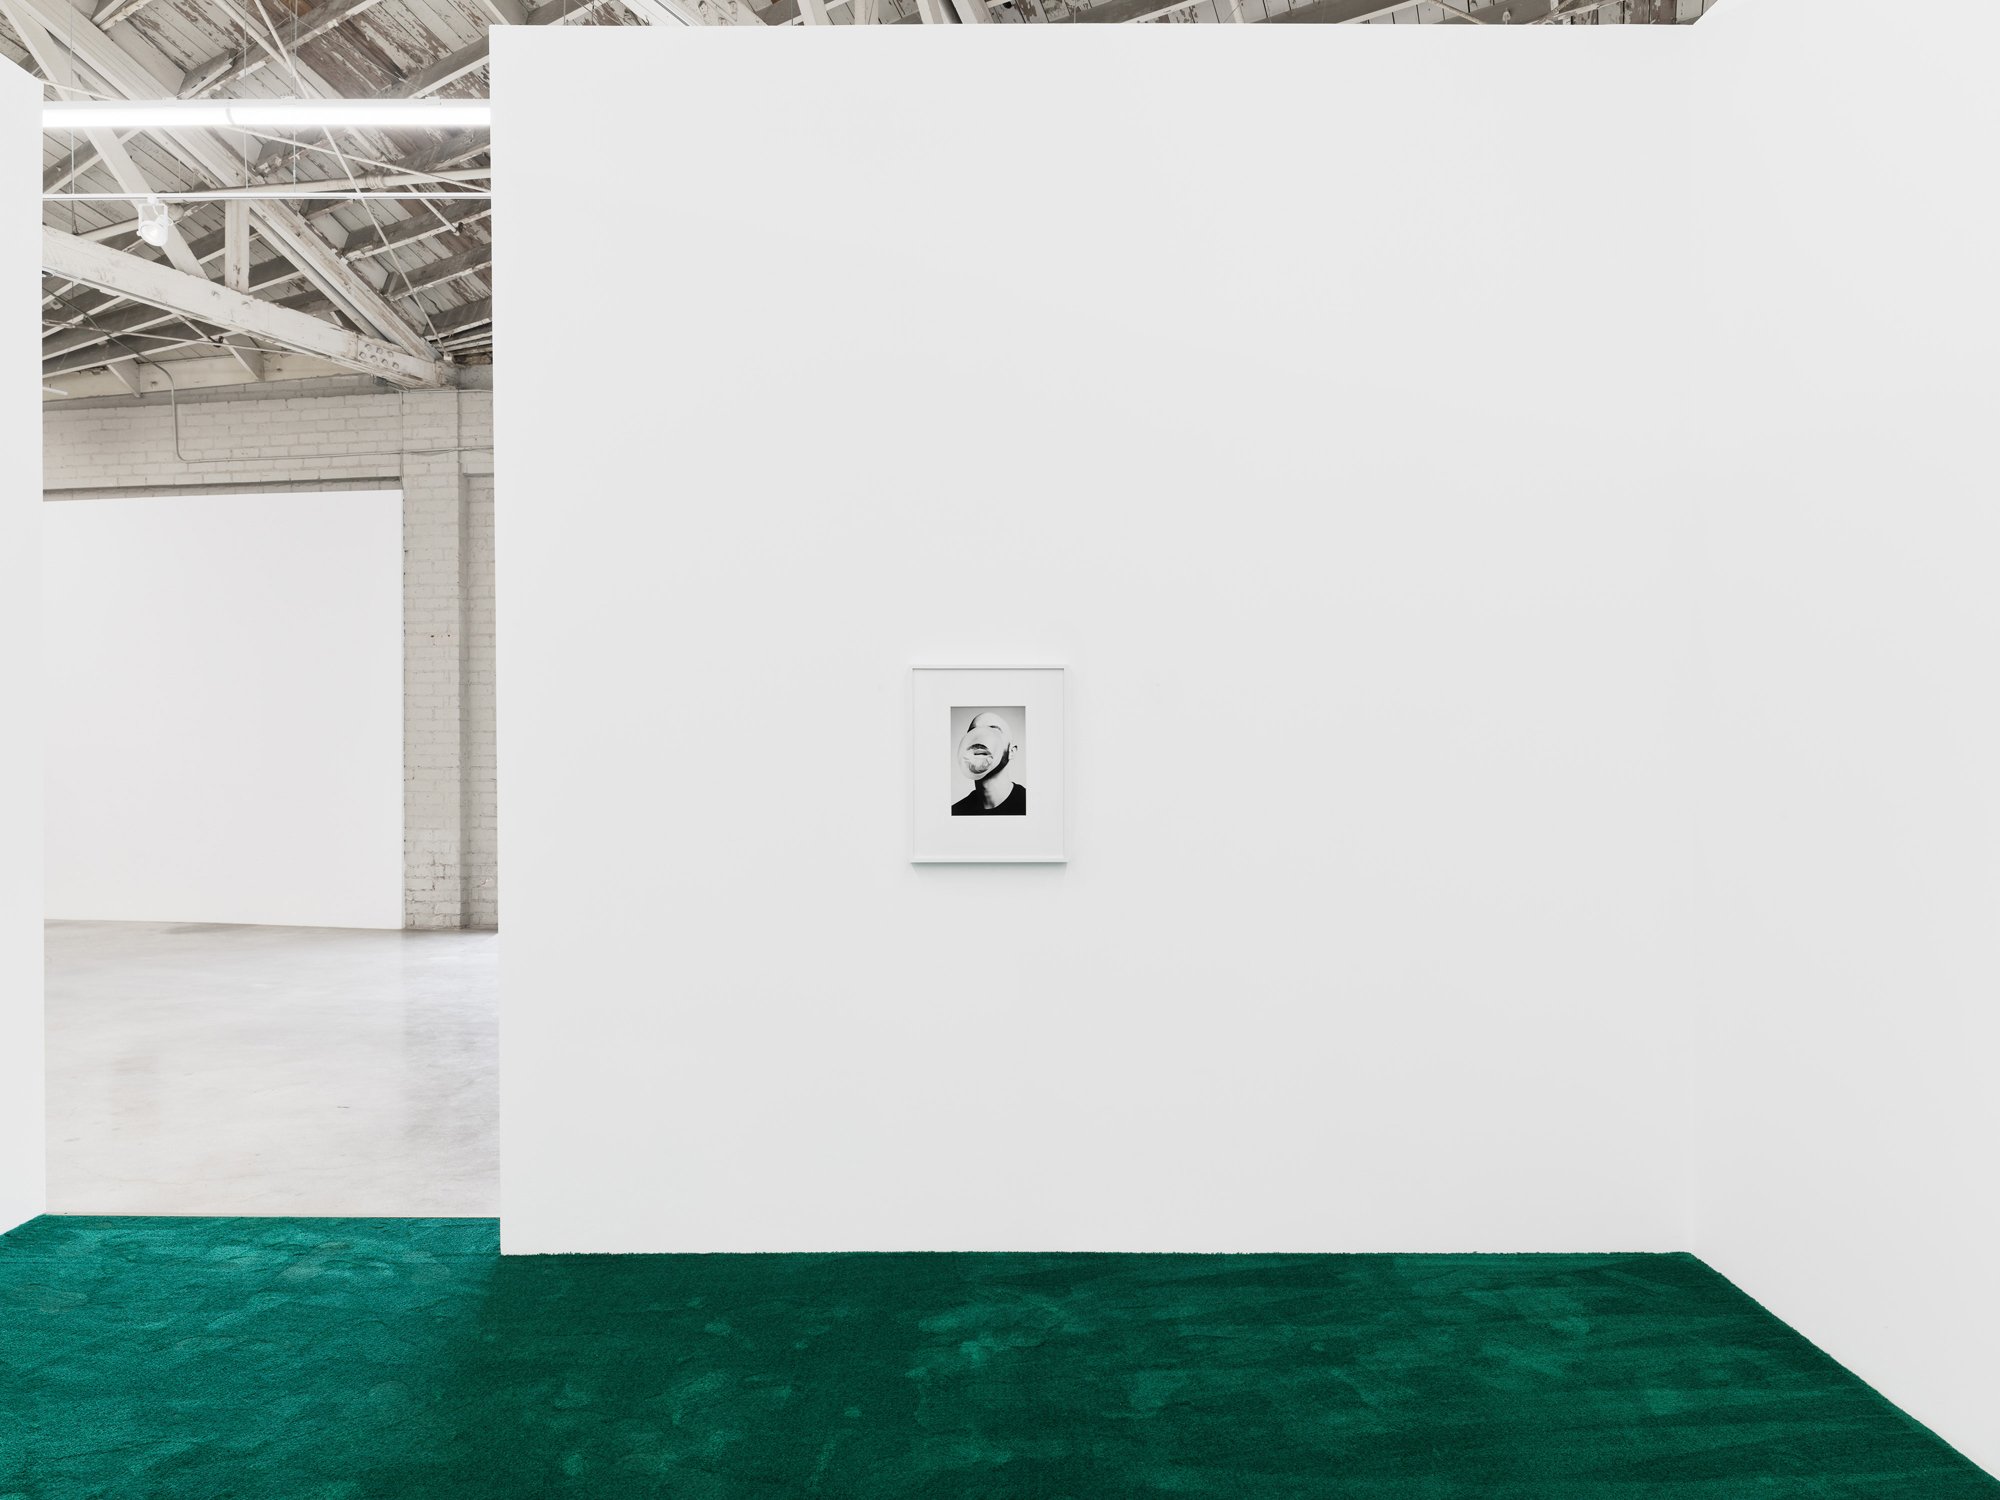   Bloom &nbsp;(2019) gelatin silver print 13” x 9.5”  Installation view of  One Eye Open  at Night Gallery, Los Angeles, USA 